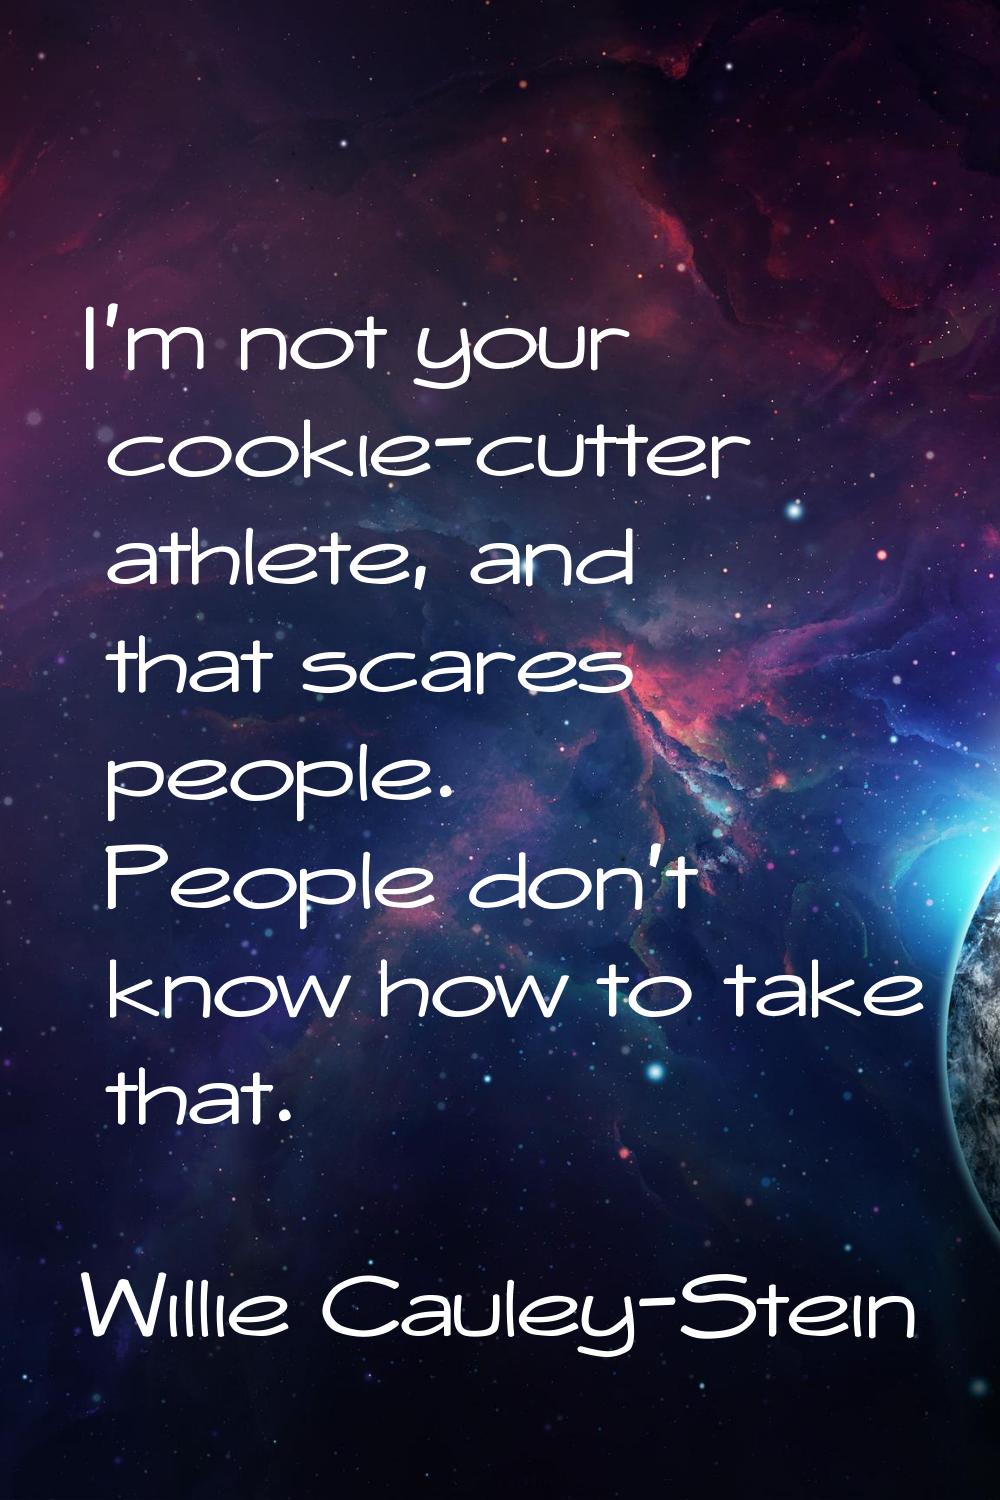 I'm not your cookie-cutter athlete, and that scares people. People don't know how to take that.